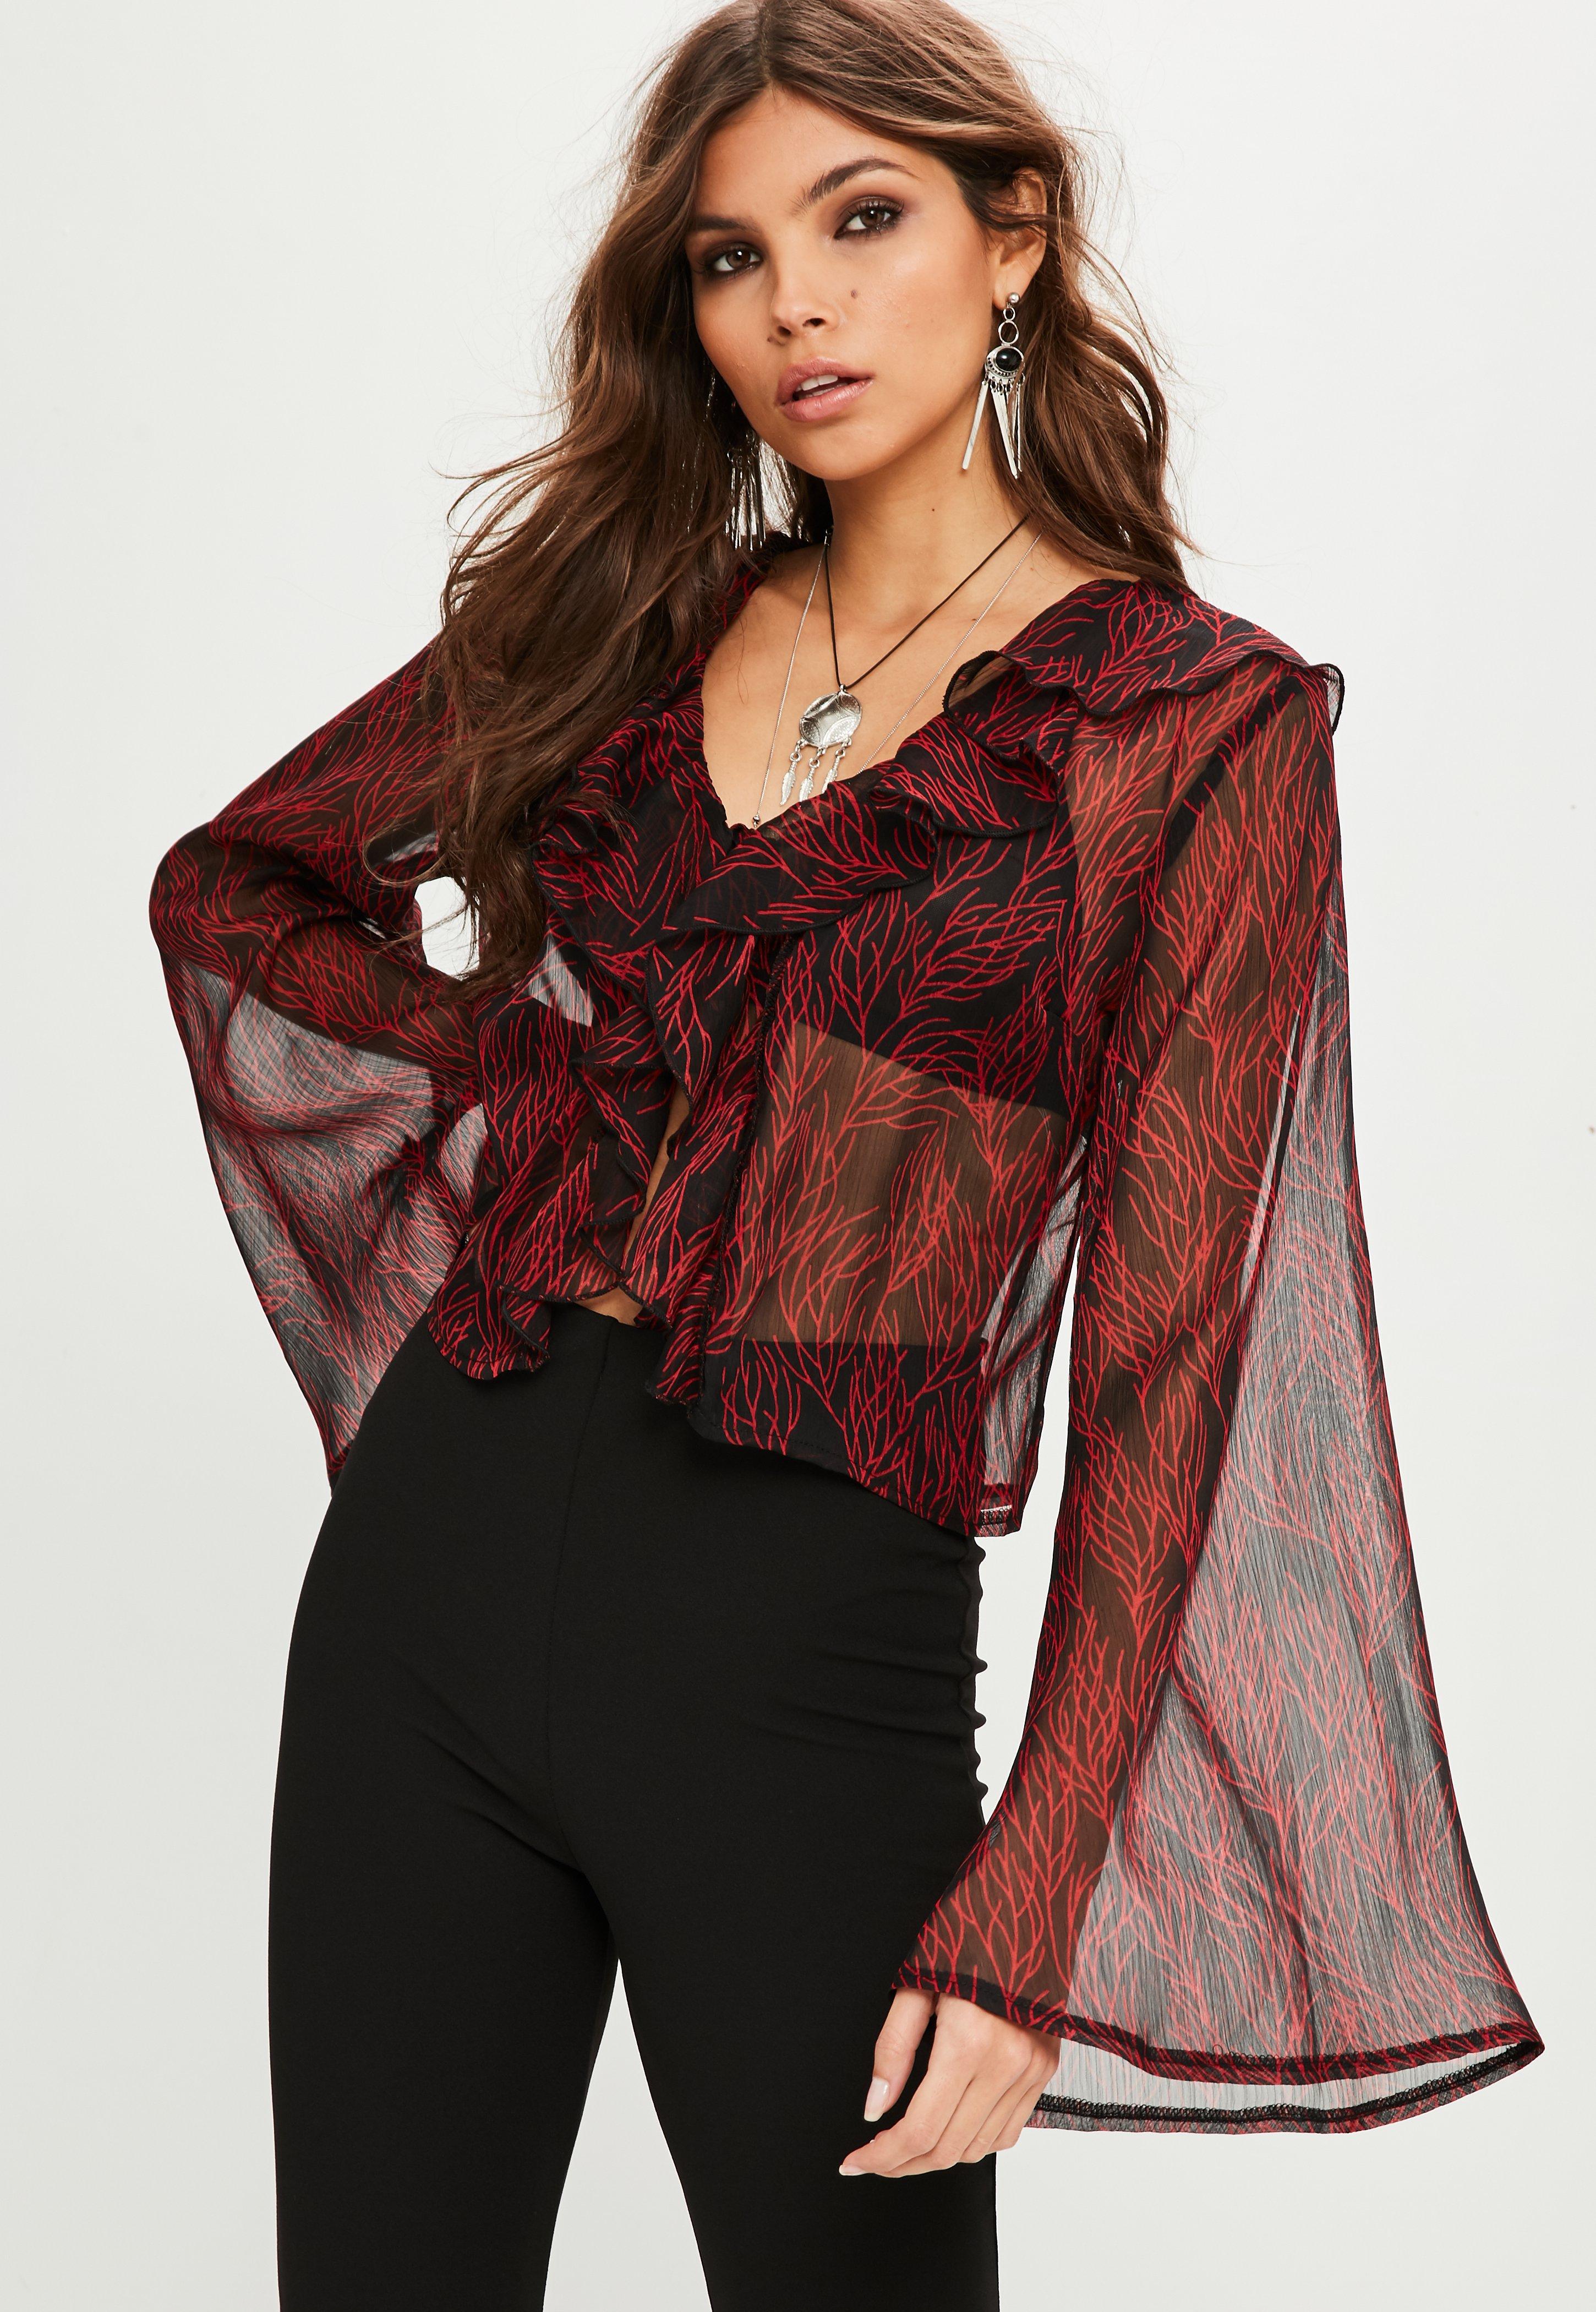 Lyst - Missguided Red Feather Print Chiffon Ruffle Blouse in Red